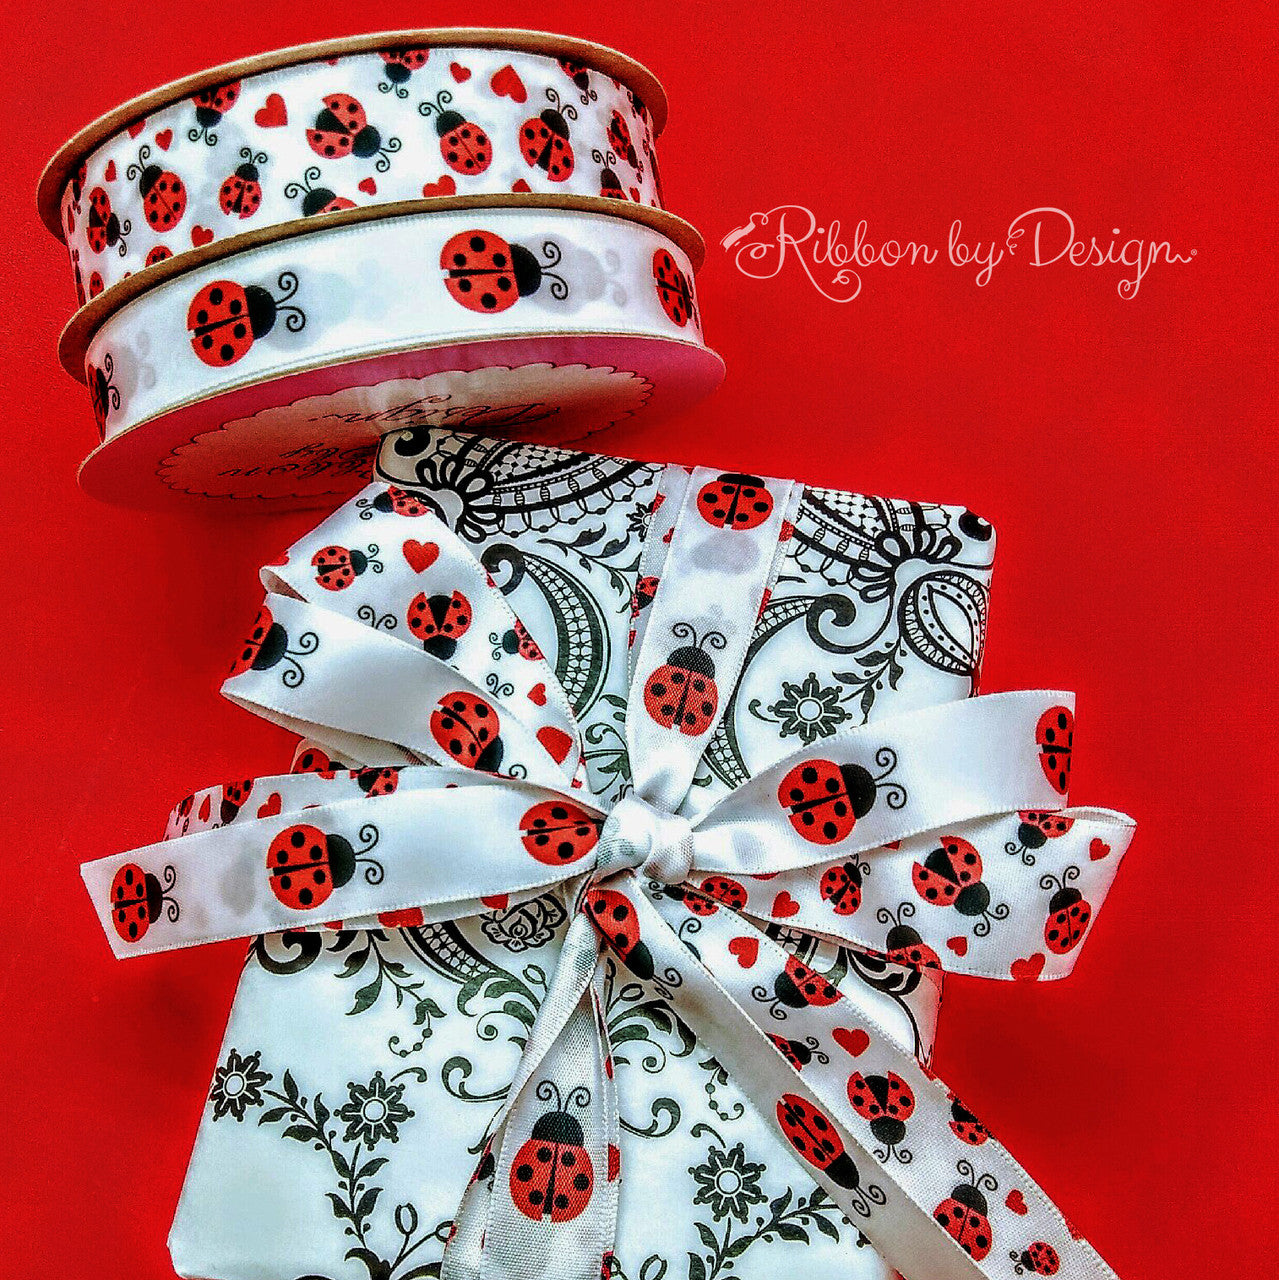 Mix and match our ladybug ribbons on a gift! Lady bugs bring good luck, more is always better!